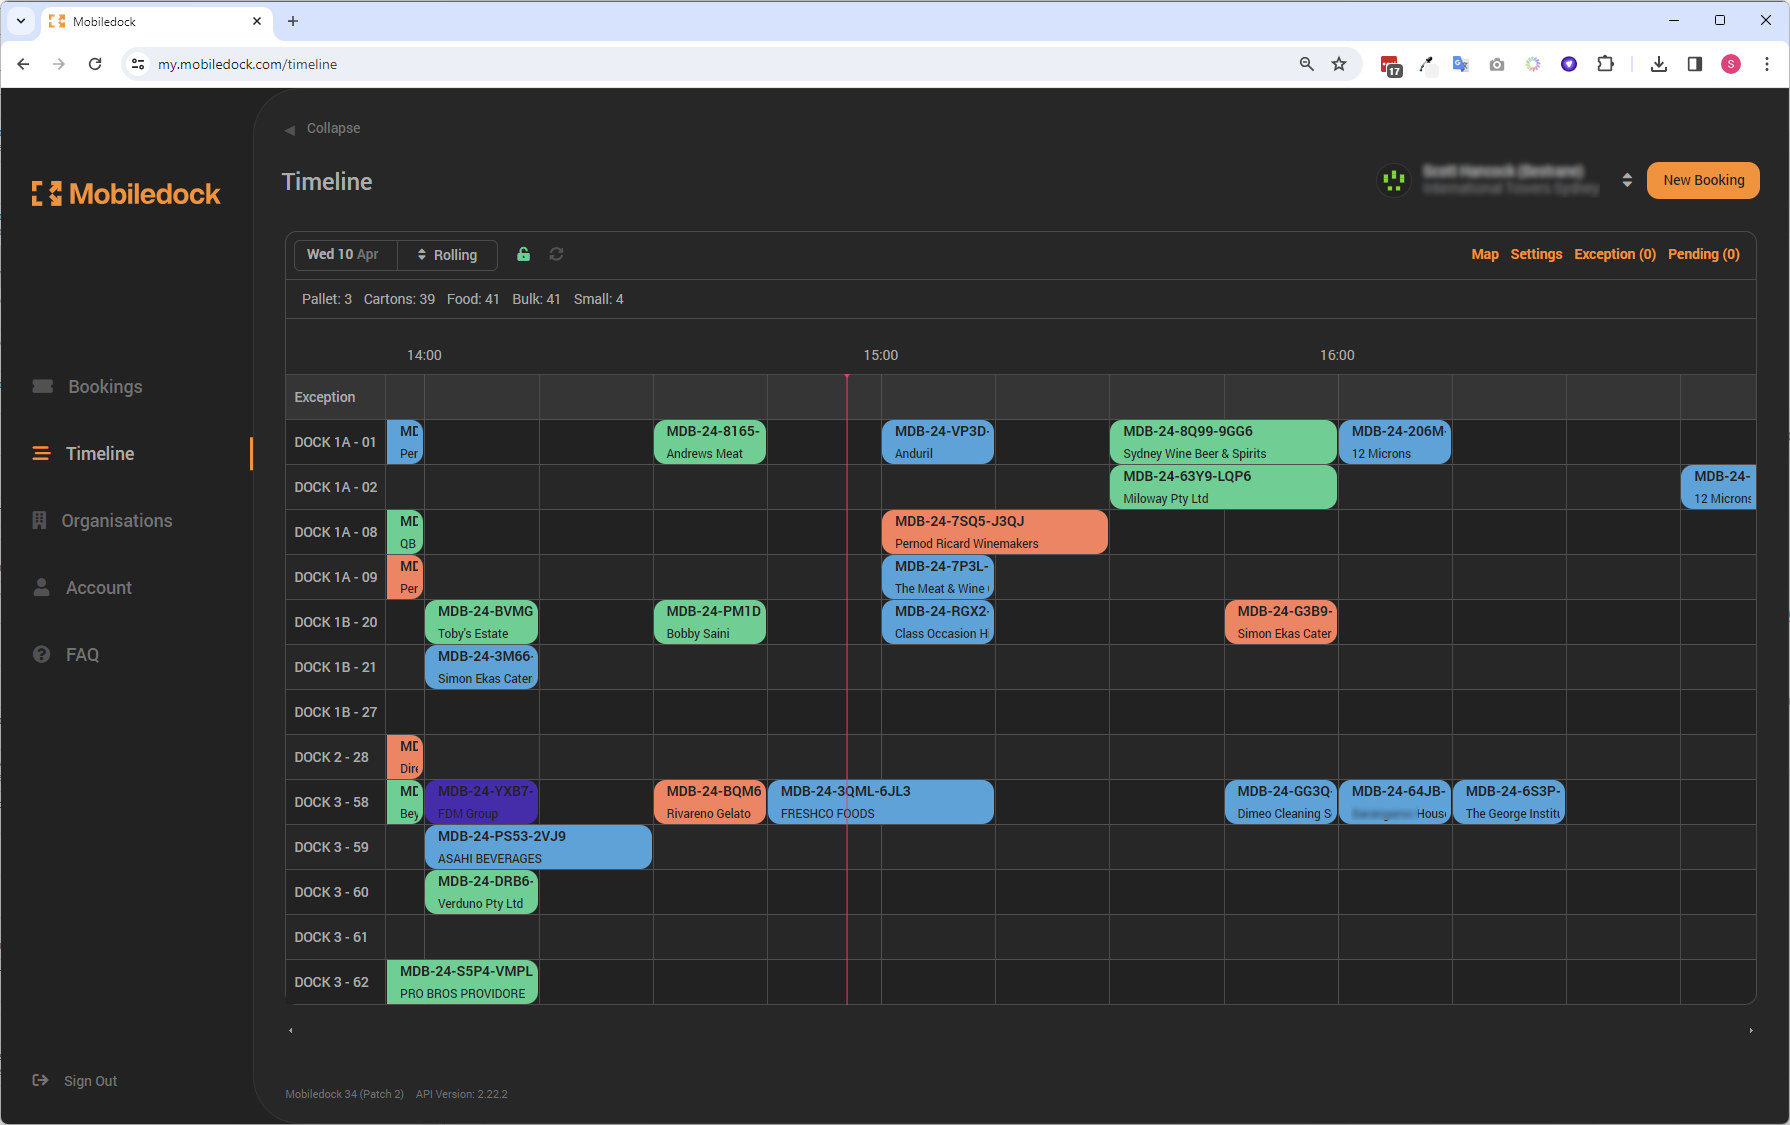 Booking timeline with live status updates. Simply drag an drop to rearrange bookings.